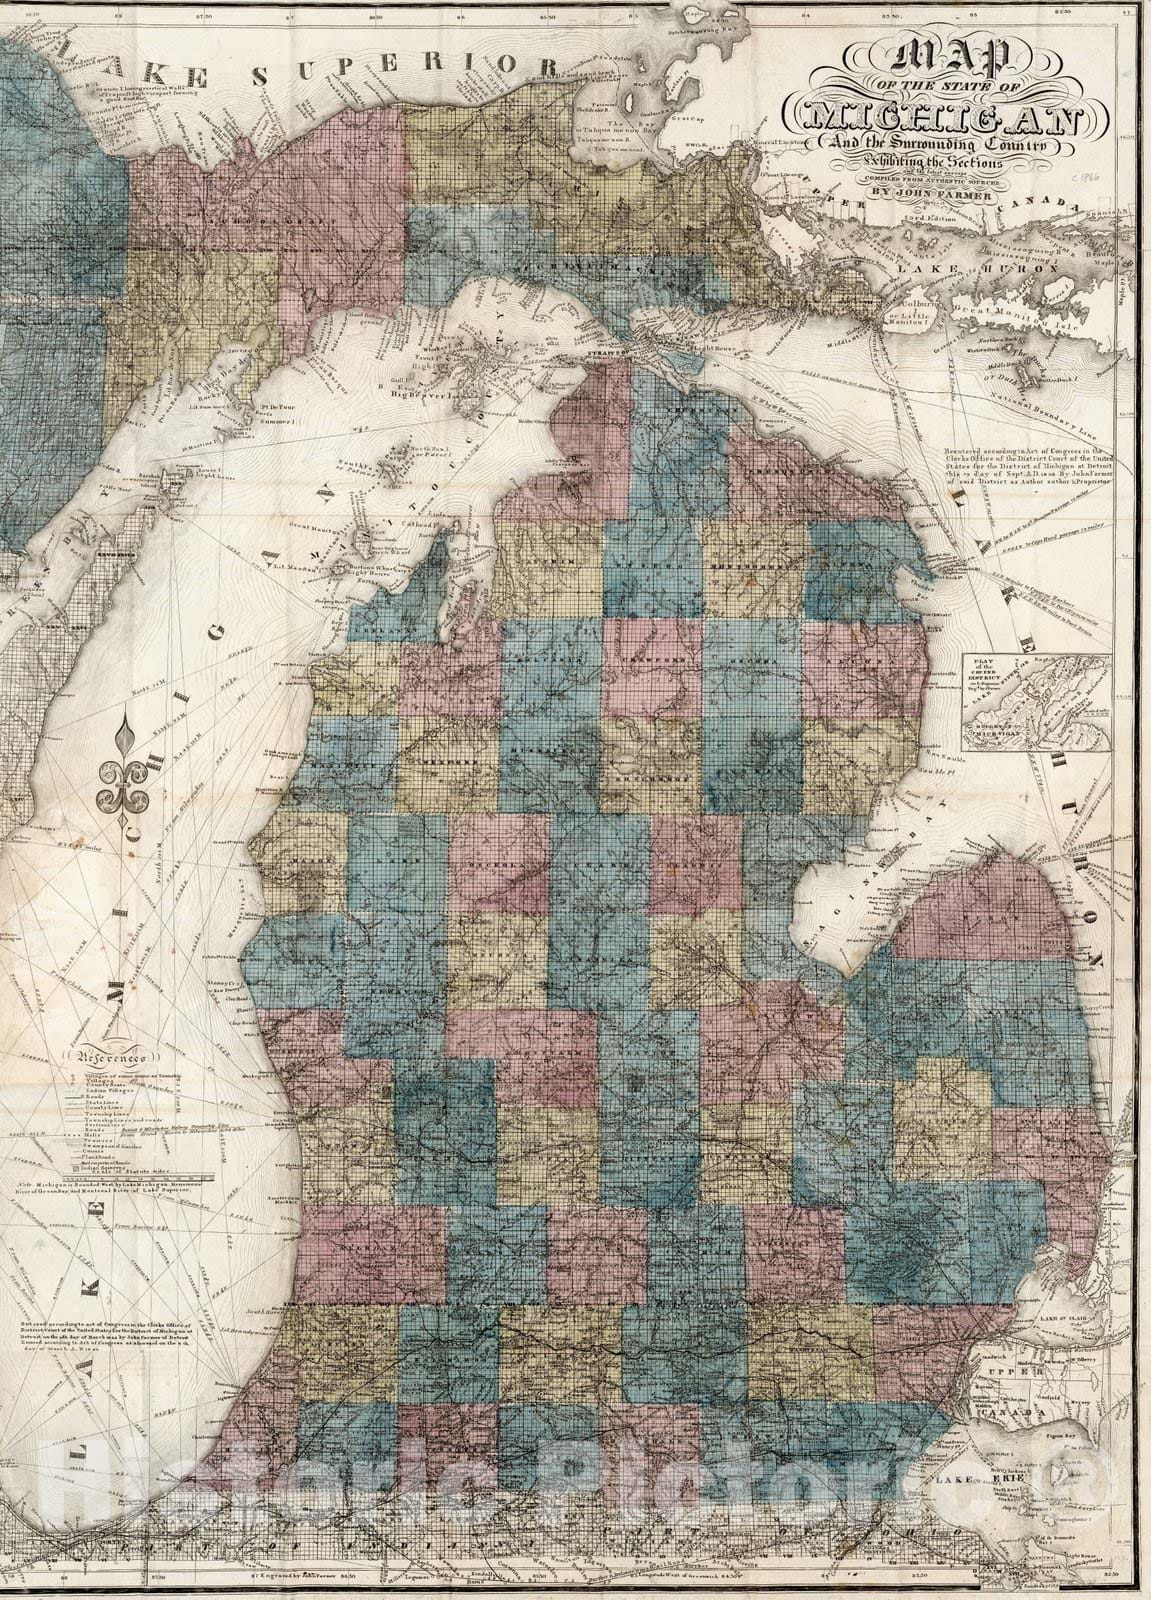 Historic Map : Map of The State of Michigan And the Surrounding Country, 1866 - Vintage Wall Art